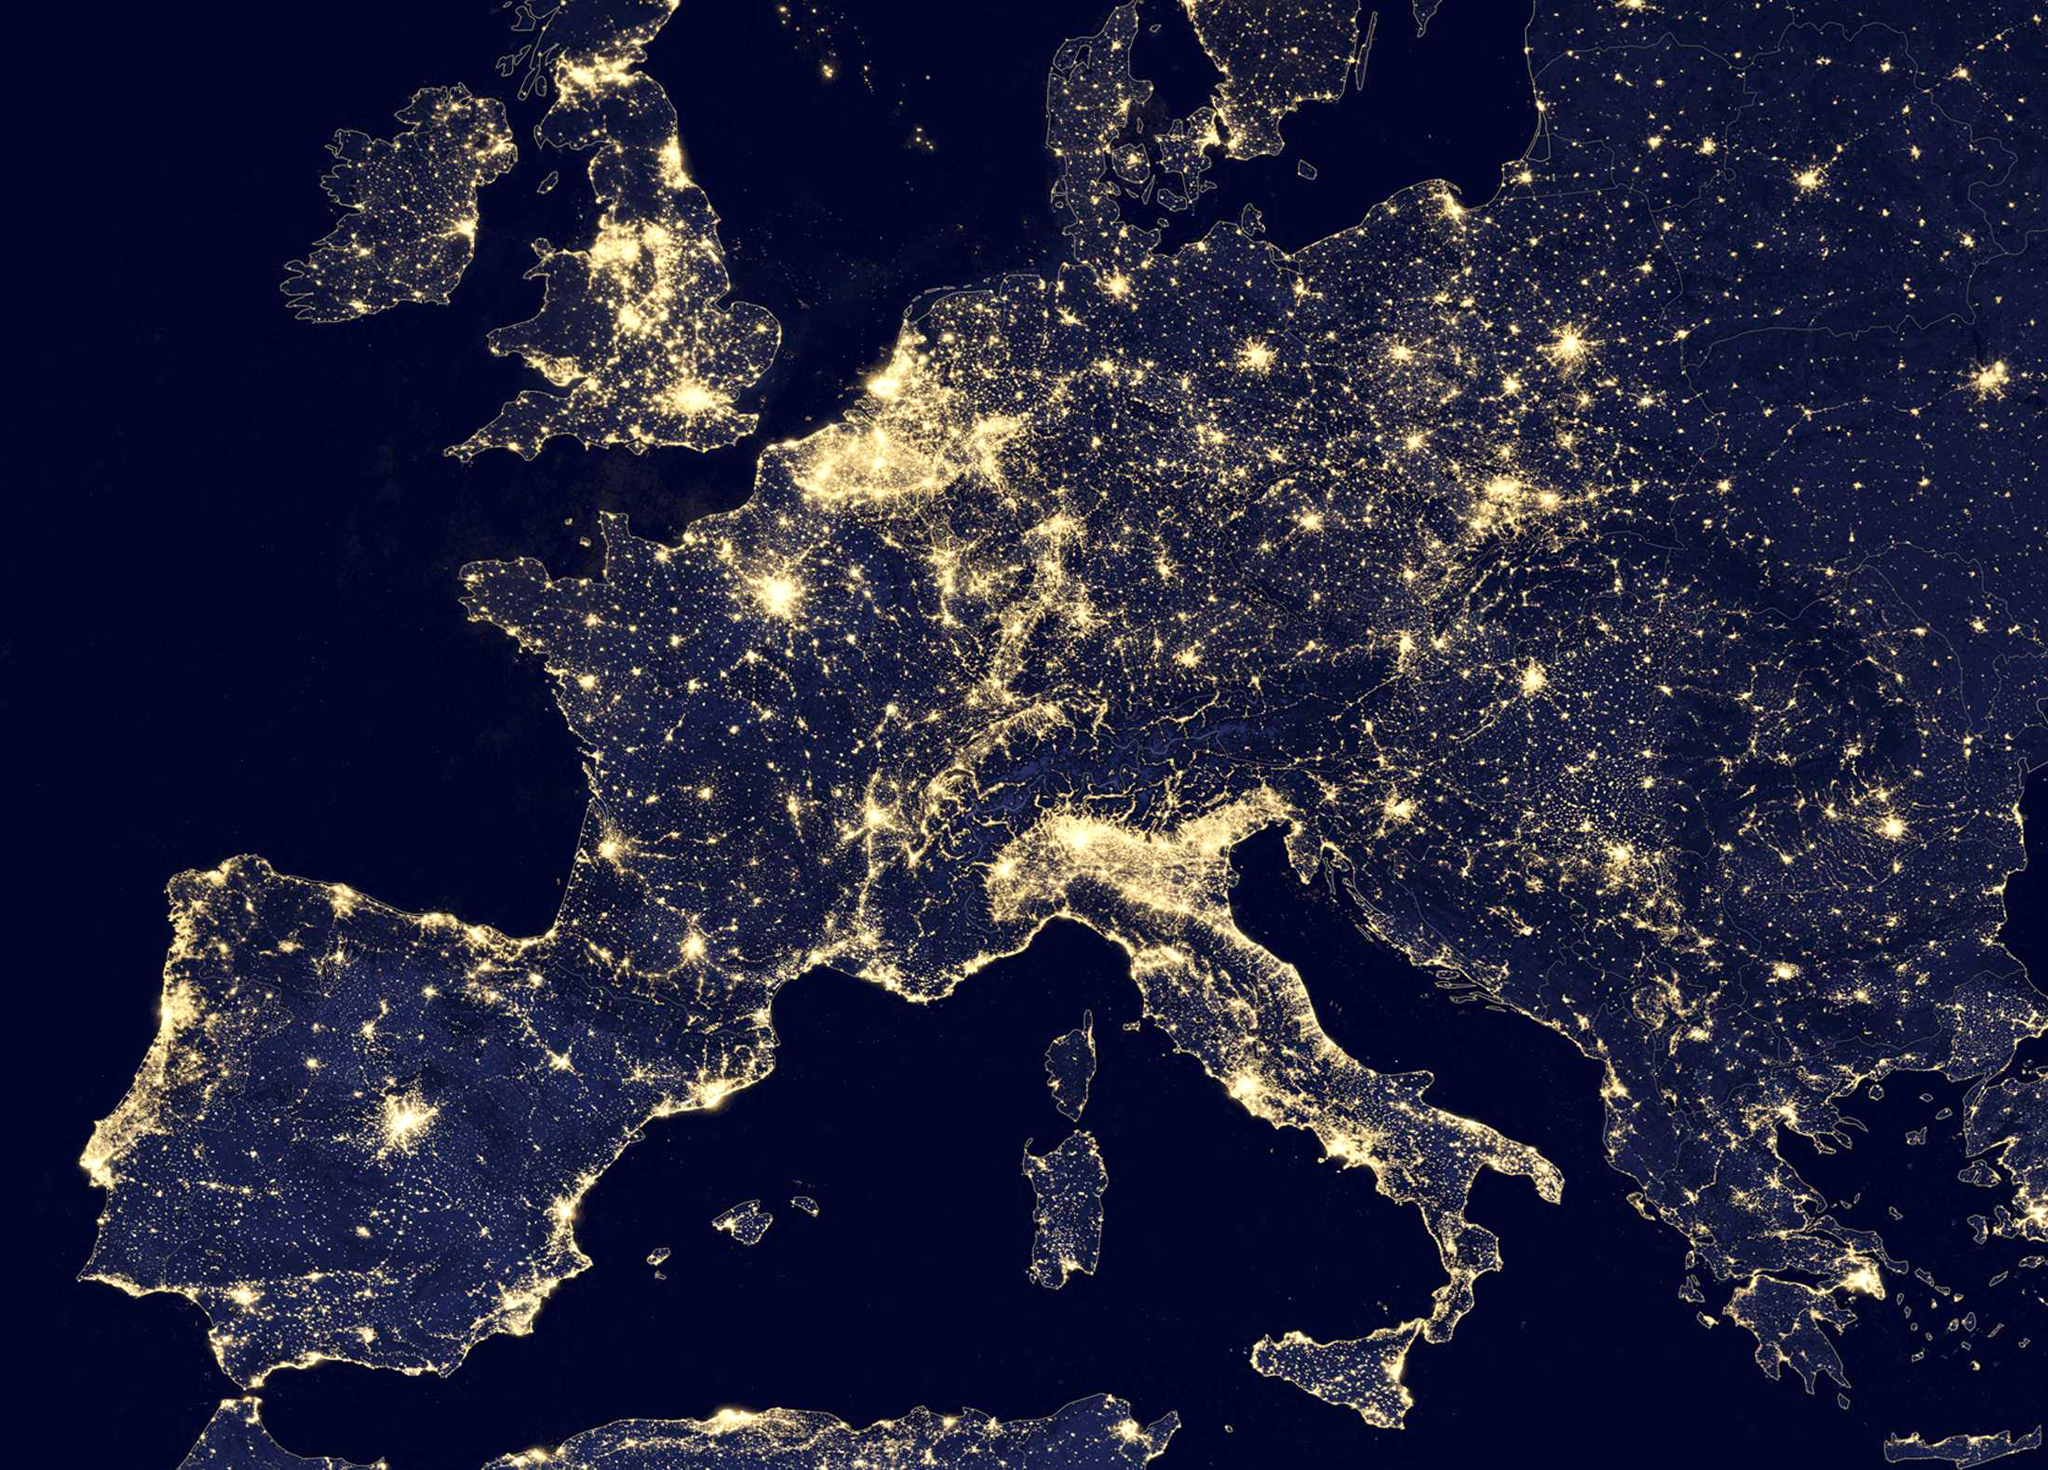 A nighttime view of Europe made possible by the �day-night band� of the Visible Infrared Imaging Radiometer Suite (VIIRS) is seen in a global composite assembled from data acquired by the Suomi National Polar-orbiting Partnership (Suomi NPP) satellite in 2012 and released by NASA October 2, 2014 .  The VIIRS detects light in a range of wavelengths from green to near-infrared and uses filtering techniques to observe dim signals such as city lights, wildfires, and gas flares.   REUTERS/NASA/Handout  (UNITED STATES - Tags: ENVIRONMENT ENERGY SCIENCE TECHNOLOGY) FOR EDITORIAL USE ONLY. NOT FOR SALE FOR MARKETING OR ADVERTISING CAMPAIGNS